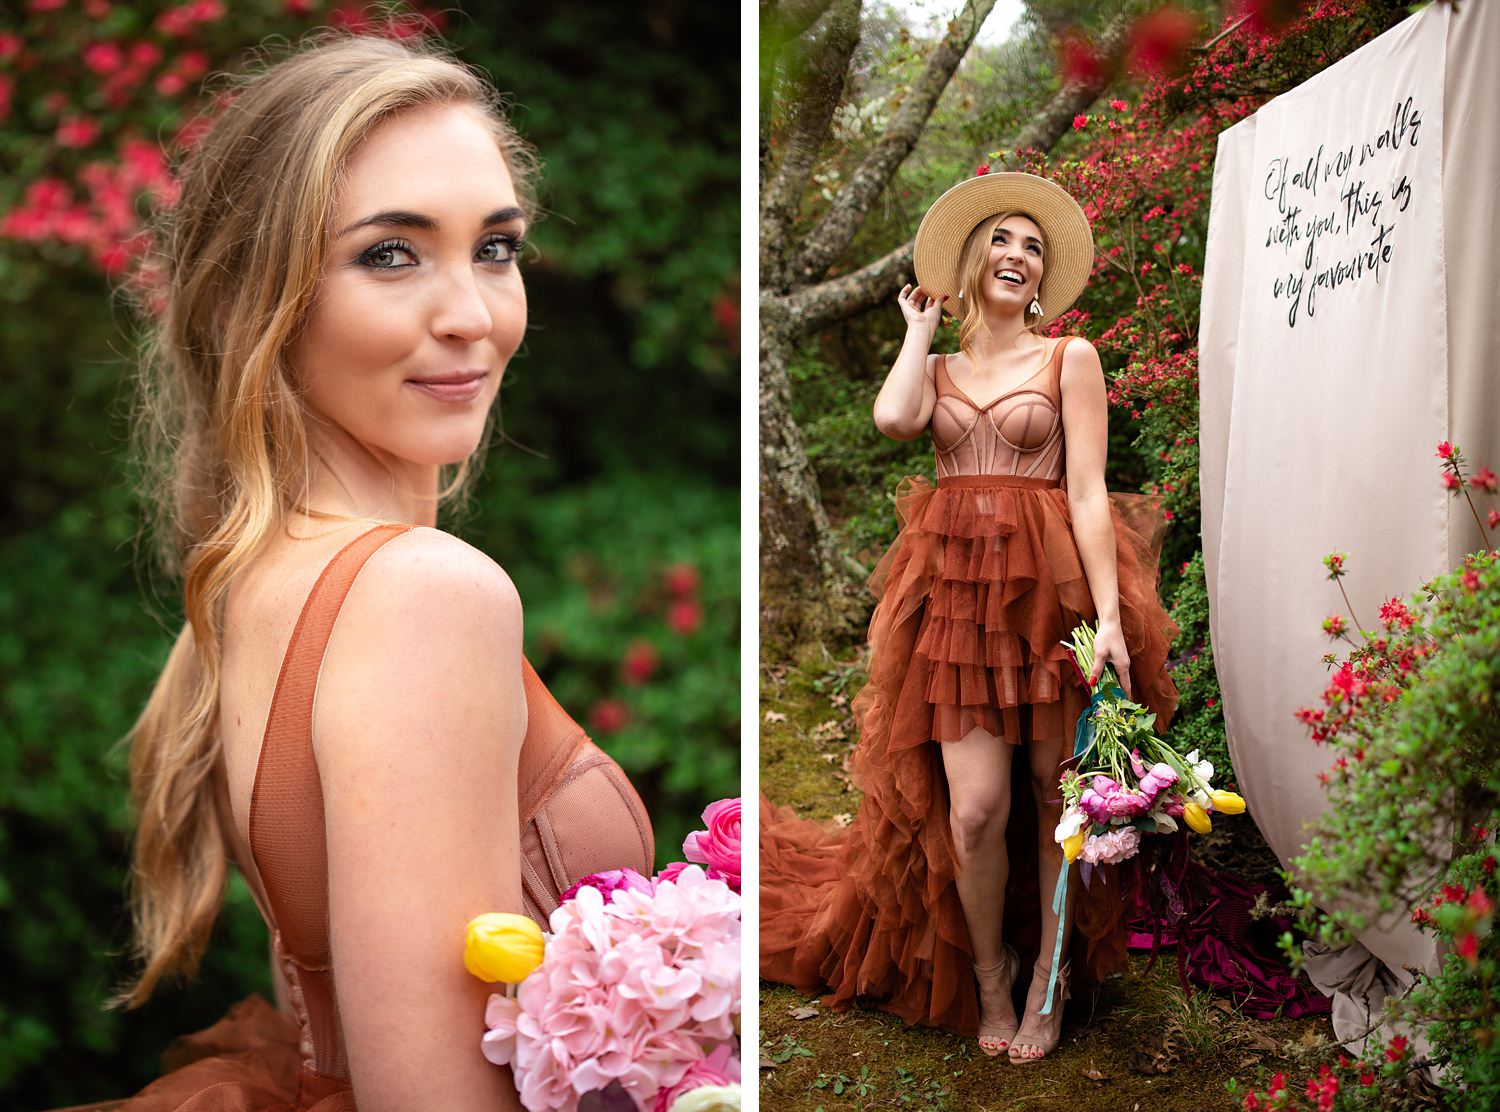 The blonde bride with loose fishtail braid models an alternative burnt orange wedding dress by Silver Swallow Designs, and a trendy straw hat.